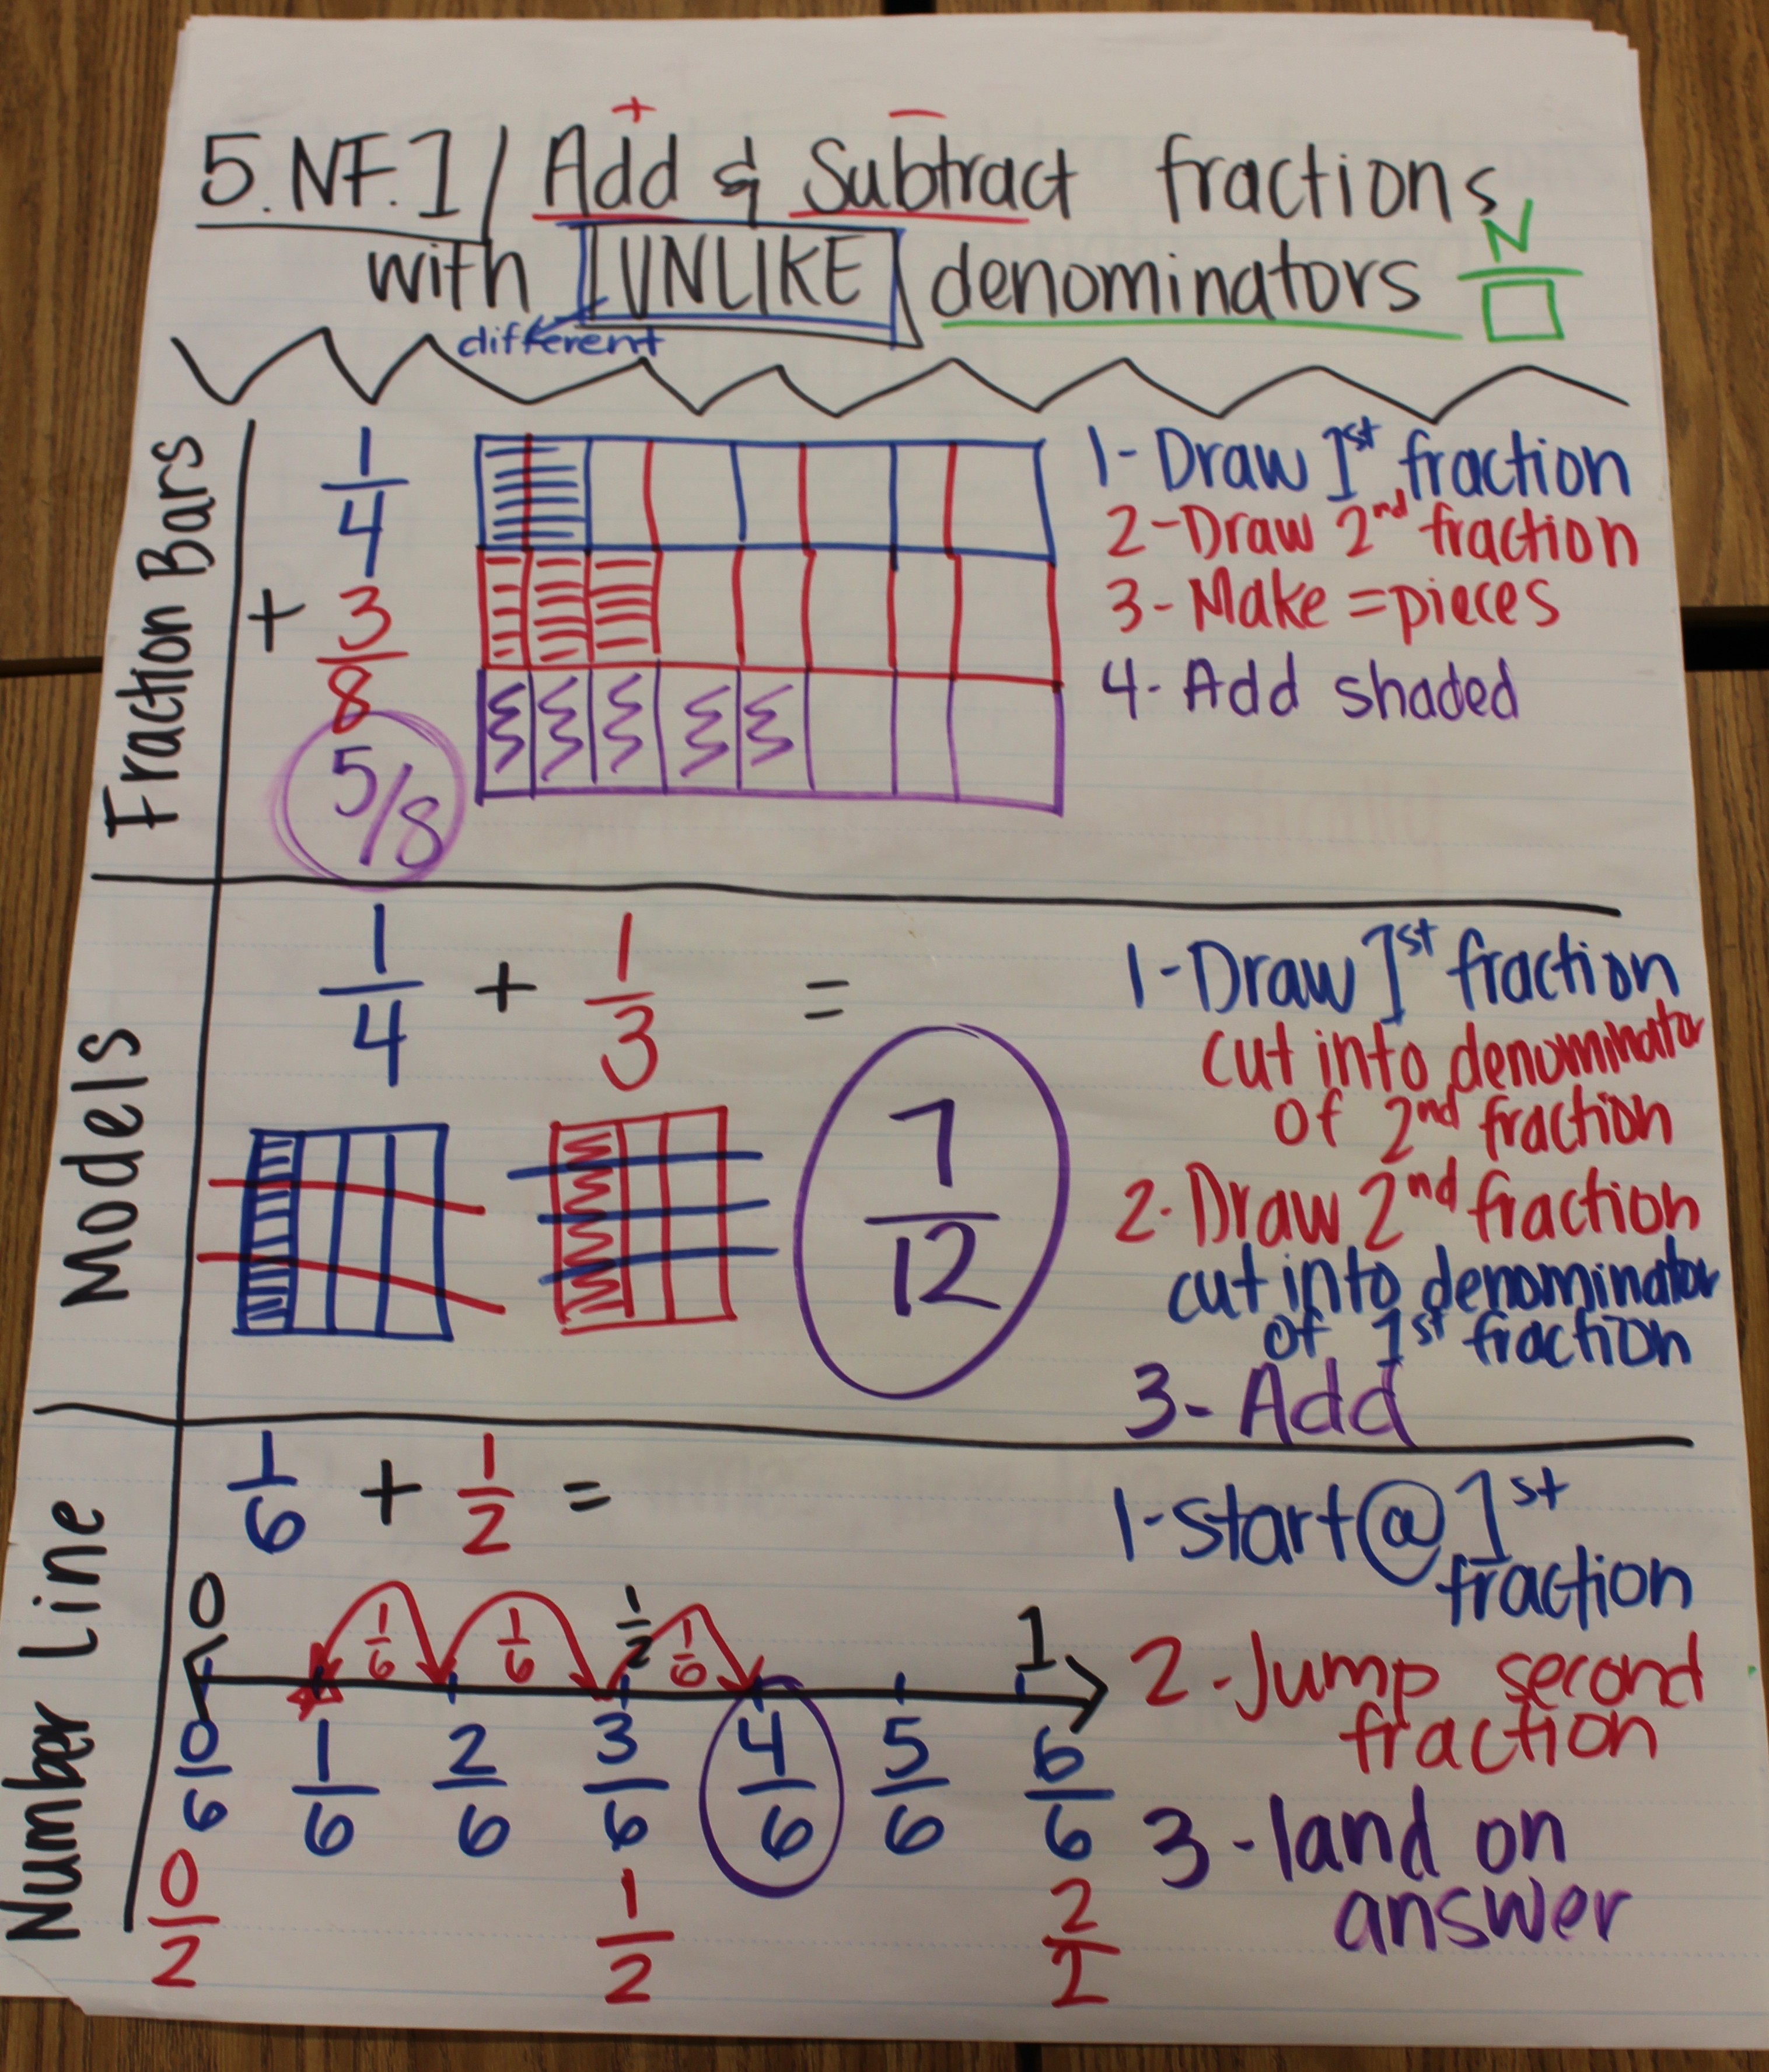 Reducing Fractions Anchor Chart